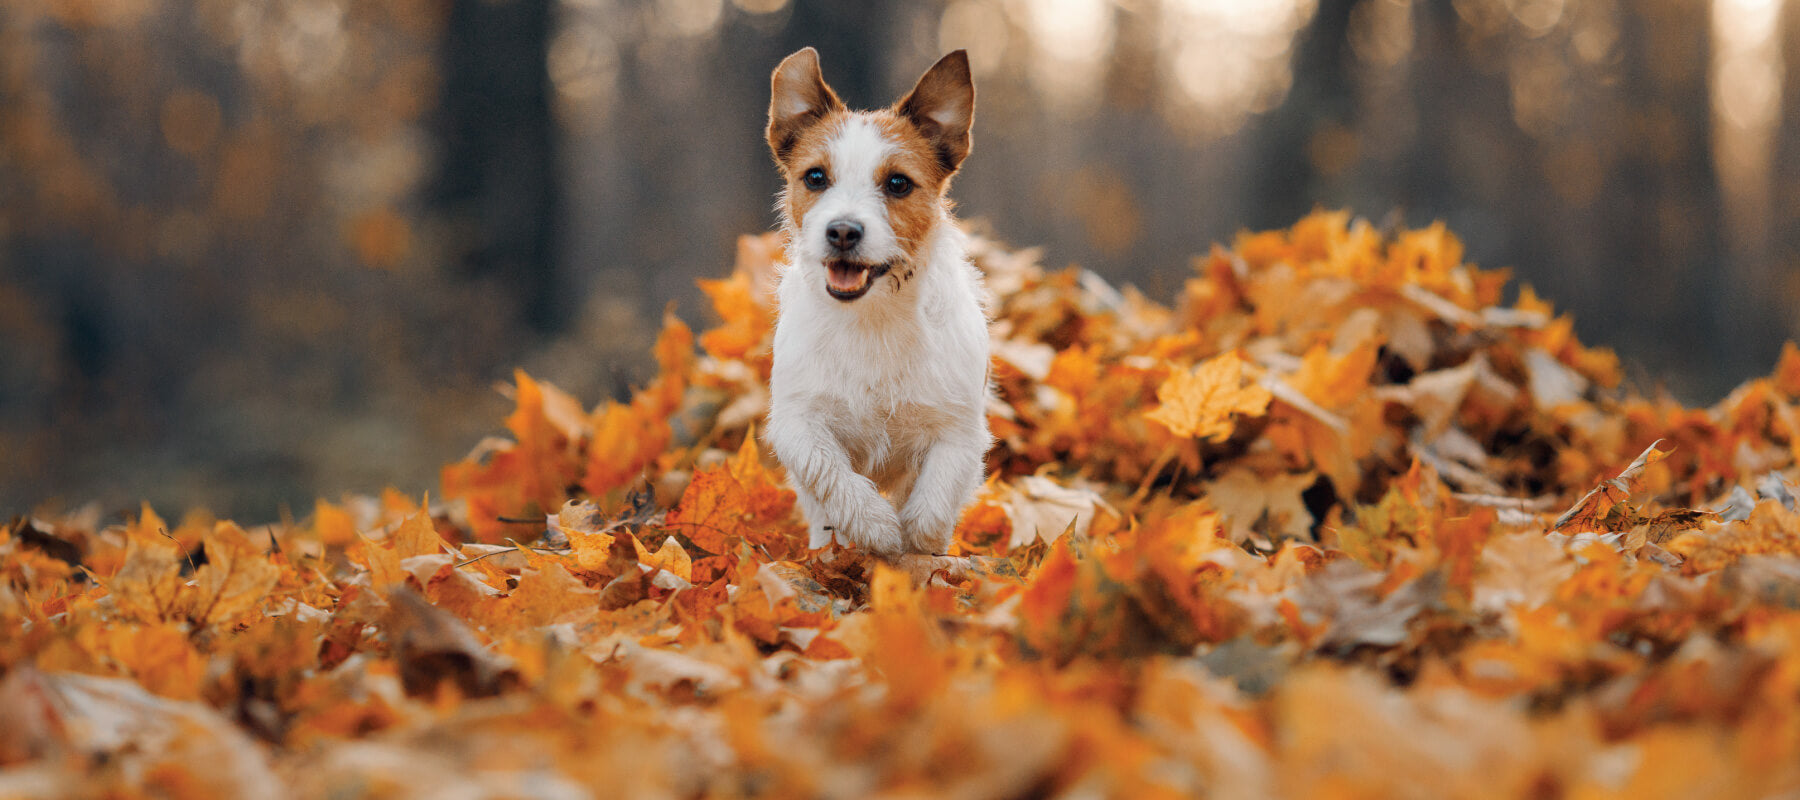 Dog running in fall leaves